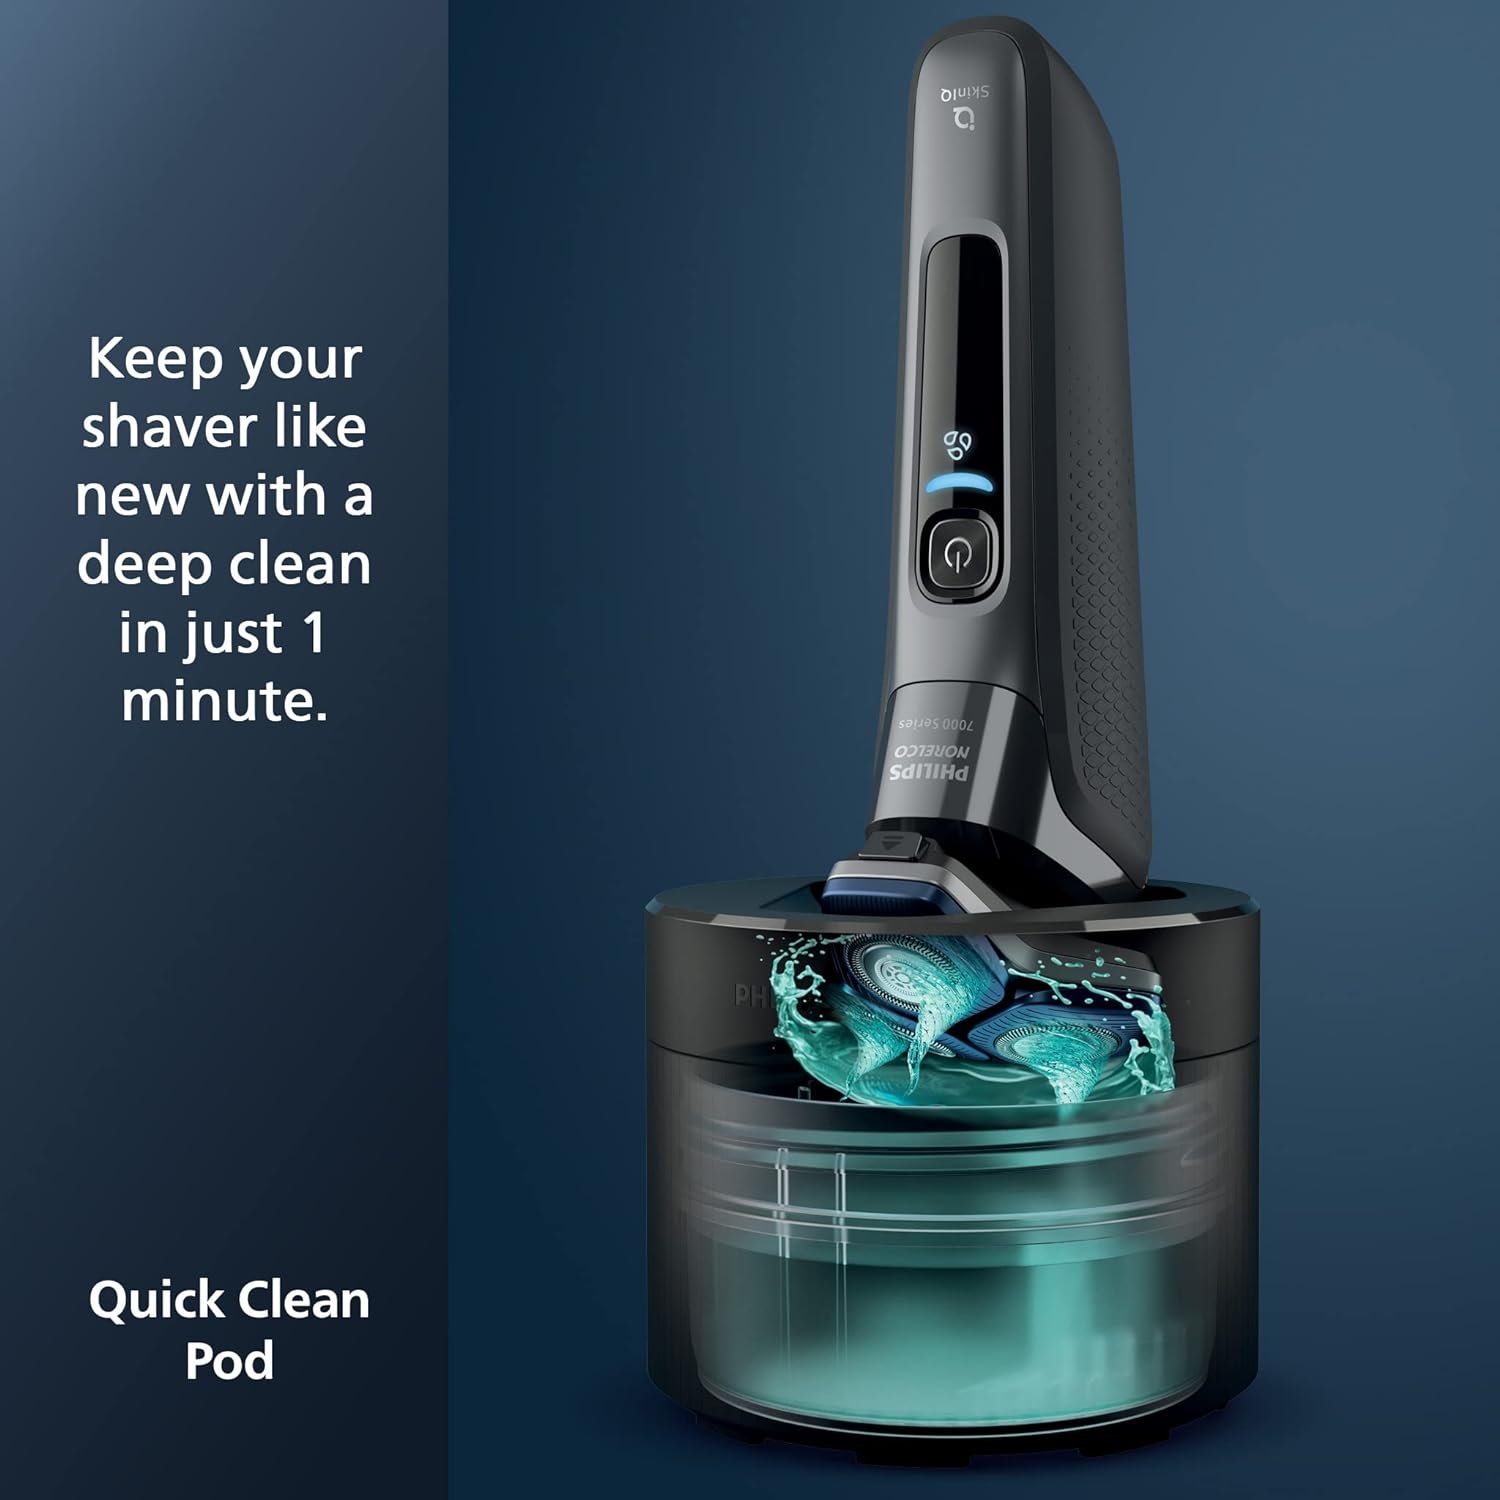 Philips Norelco Prestige Shaver with Qi Charging and Quick Cleaning Pod